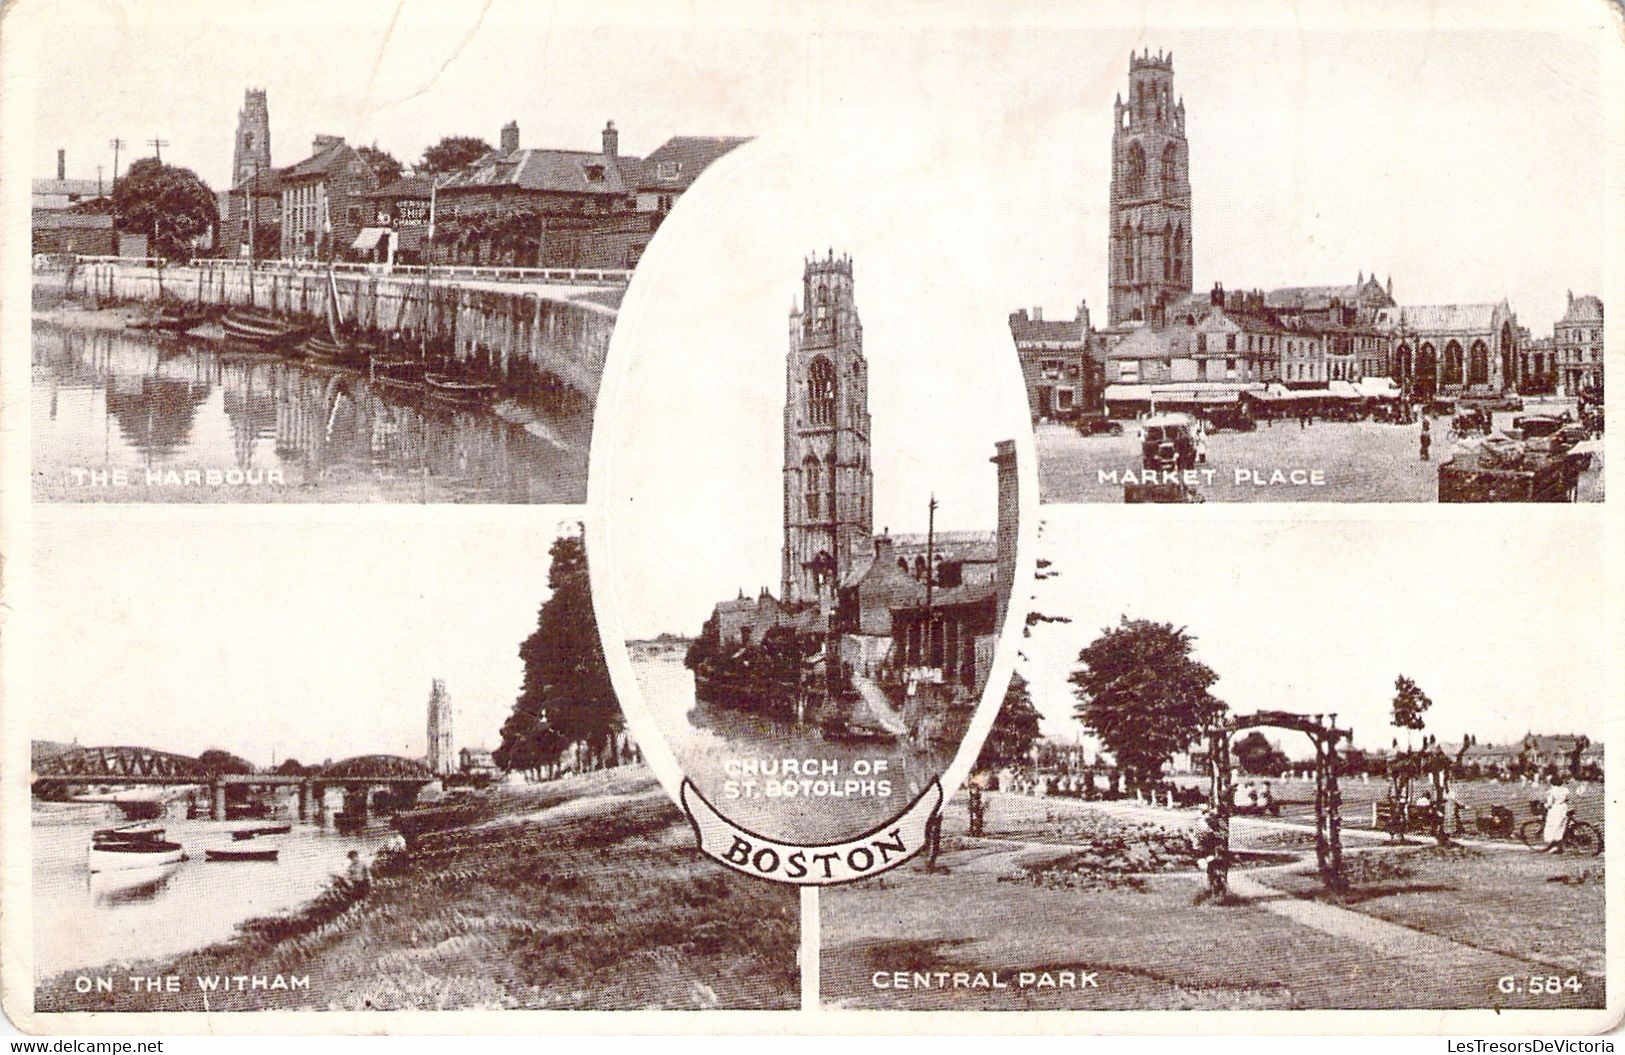 Boston - Multivues - The Harbour - Market Place - On The Witham - Central Park - Church Of St Botolphs - Boston